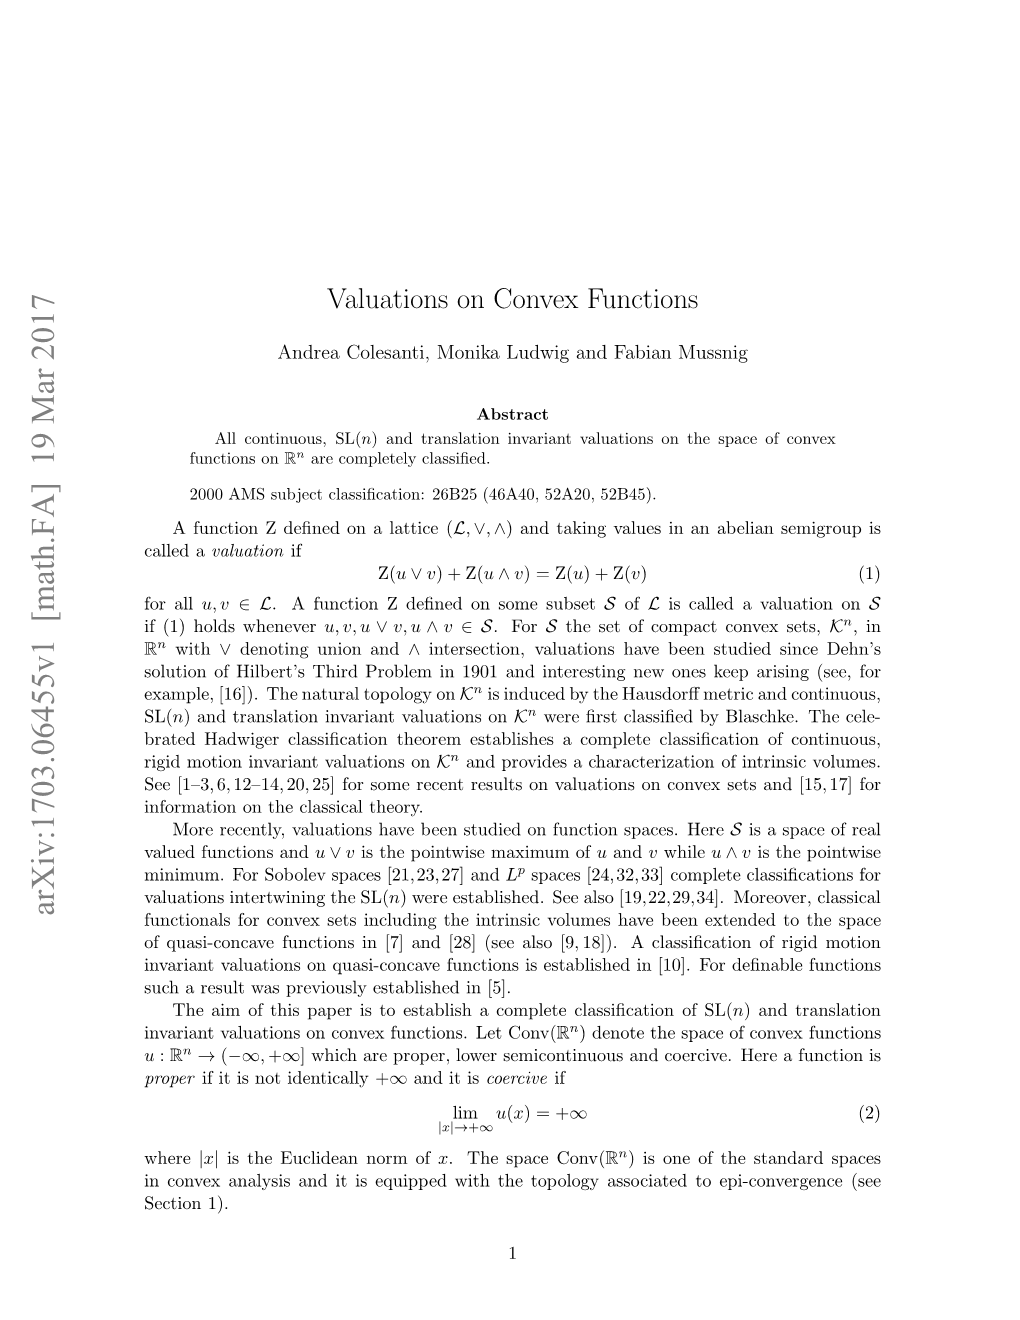 Valuations on Convex Functions